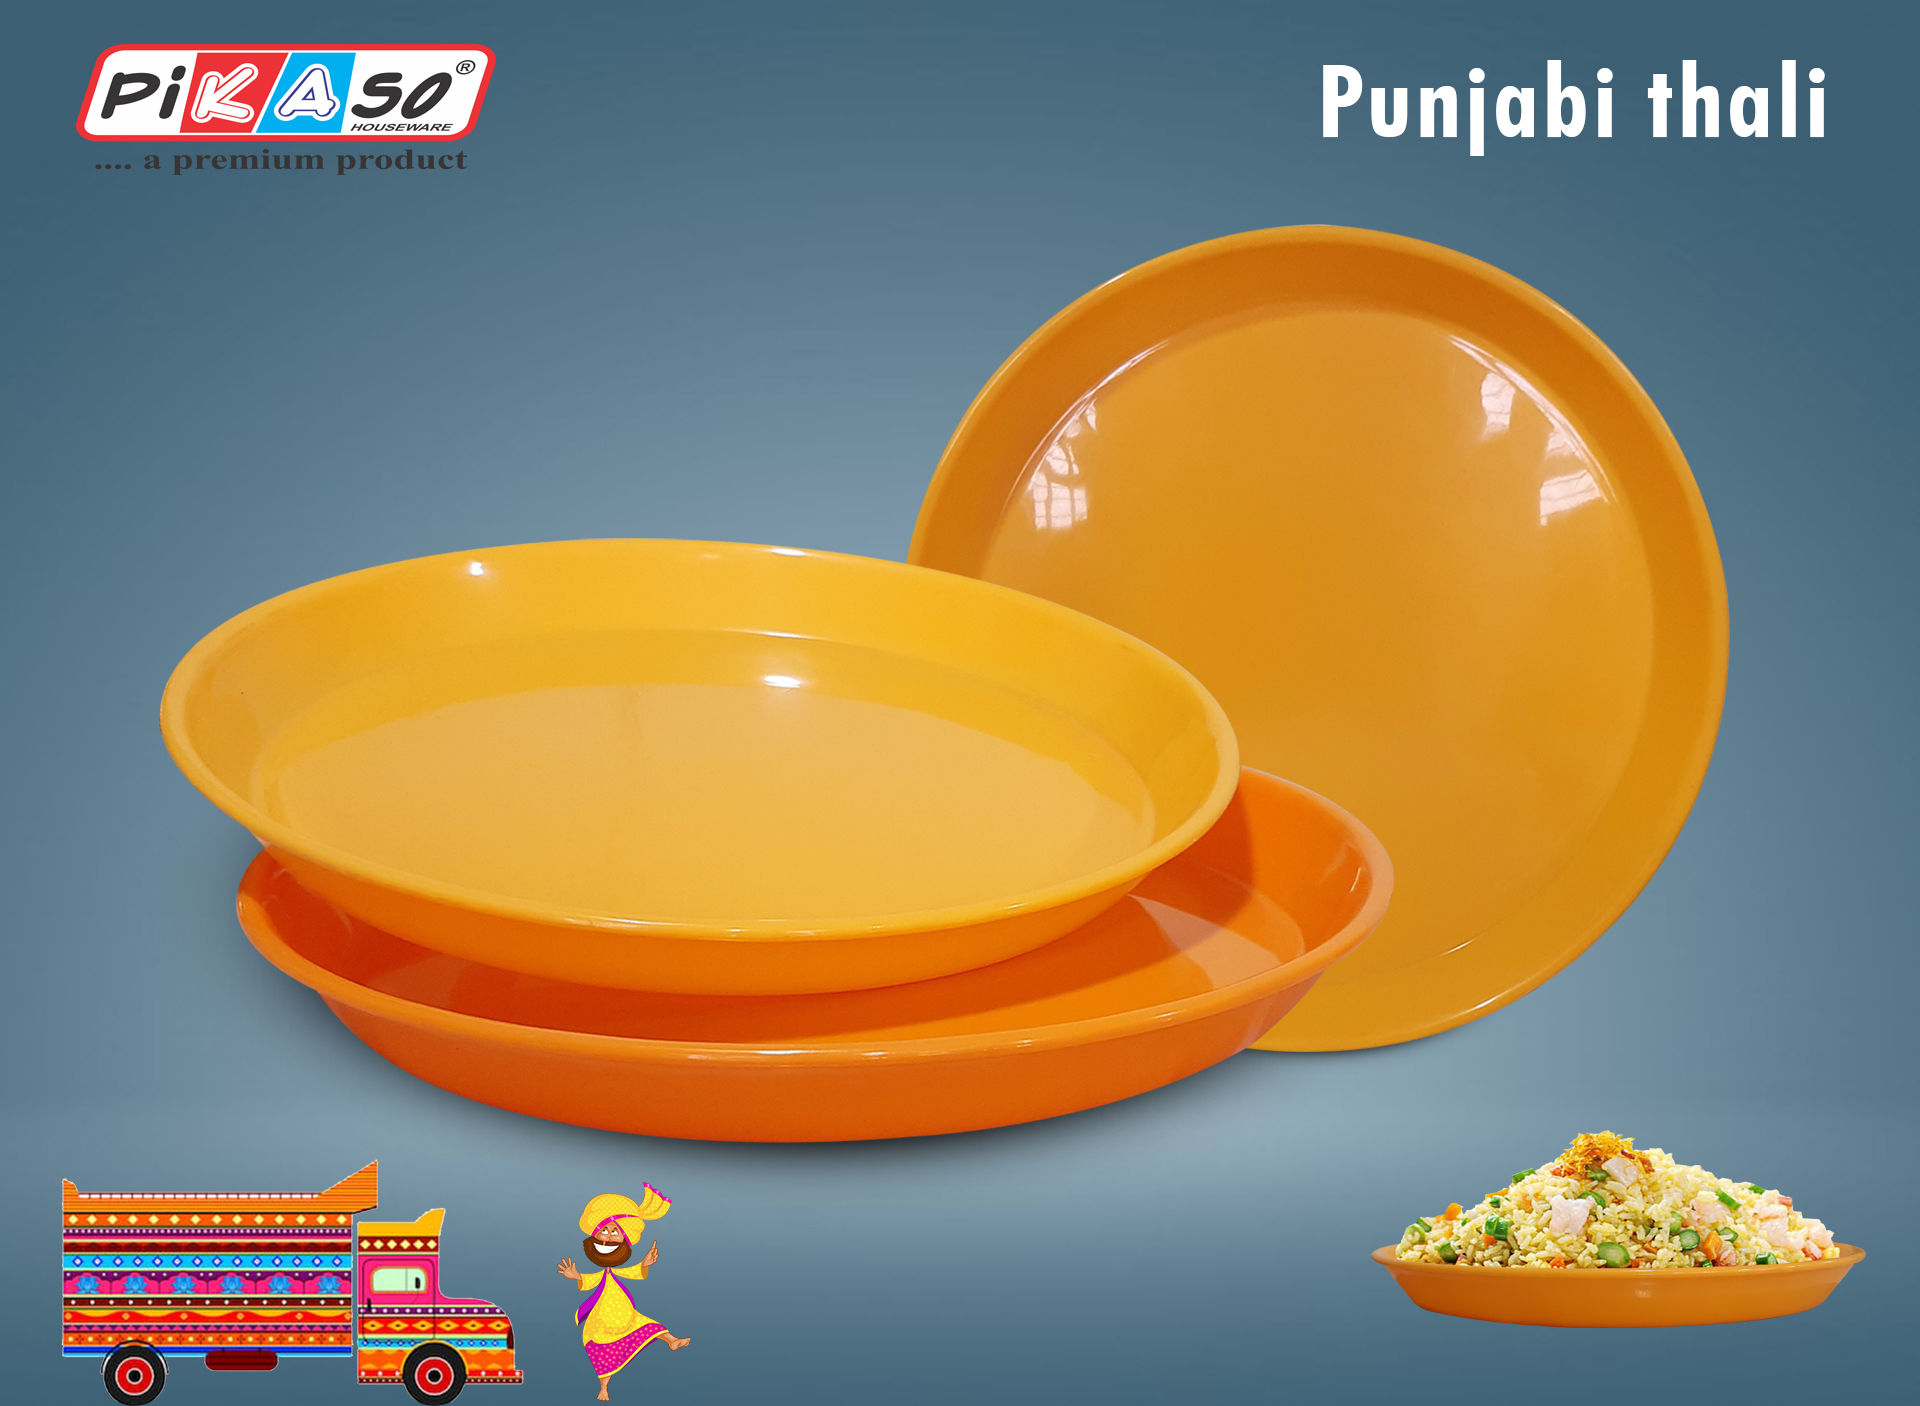 Round Full Plate 10 Inch (6 Pc Set)